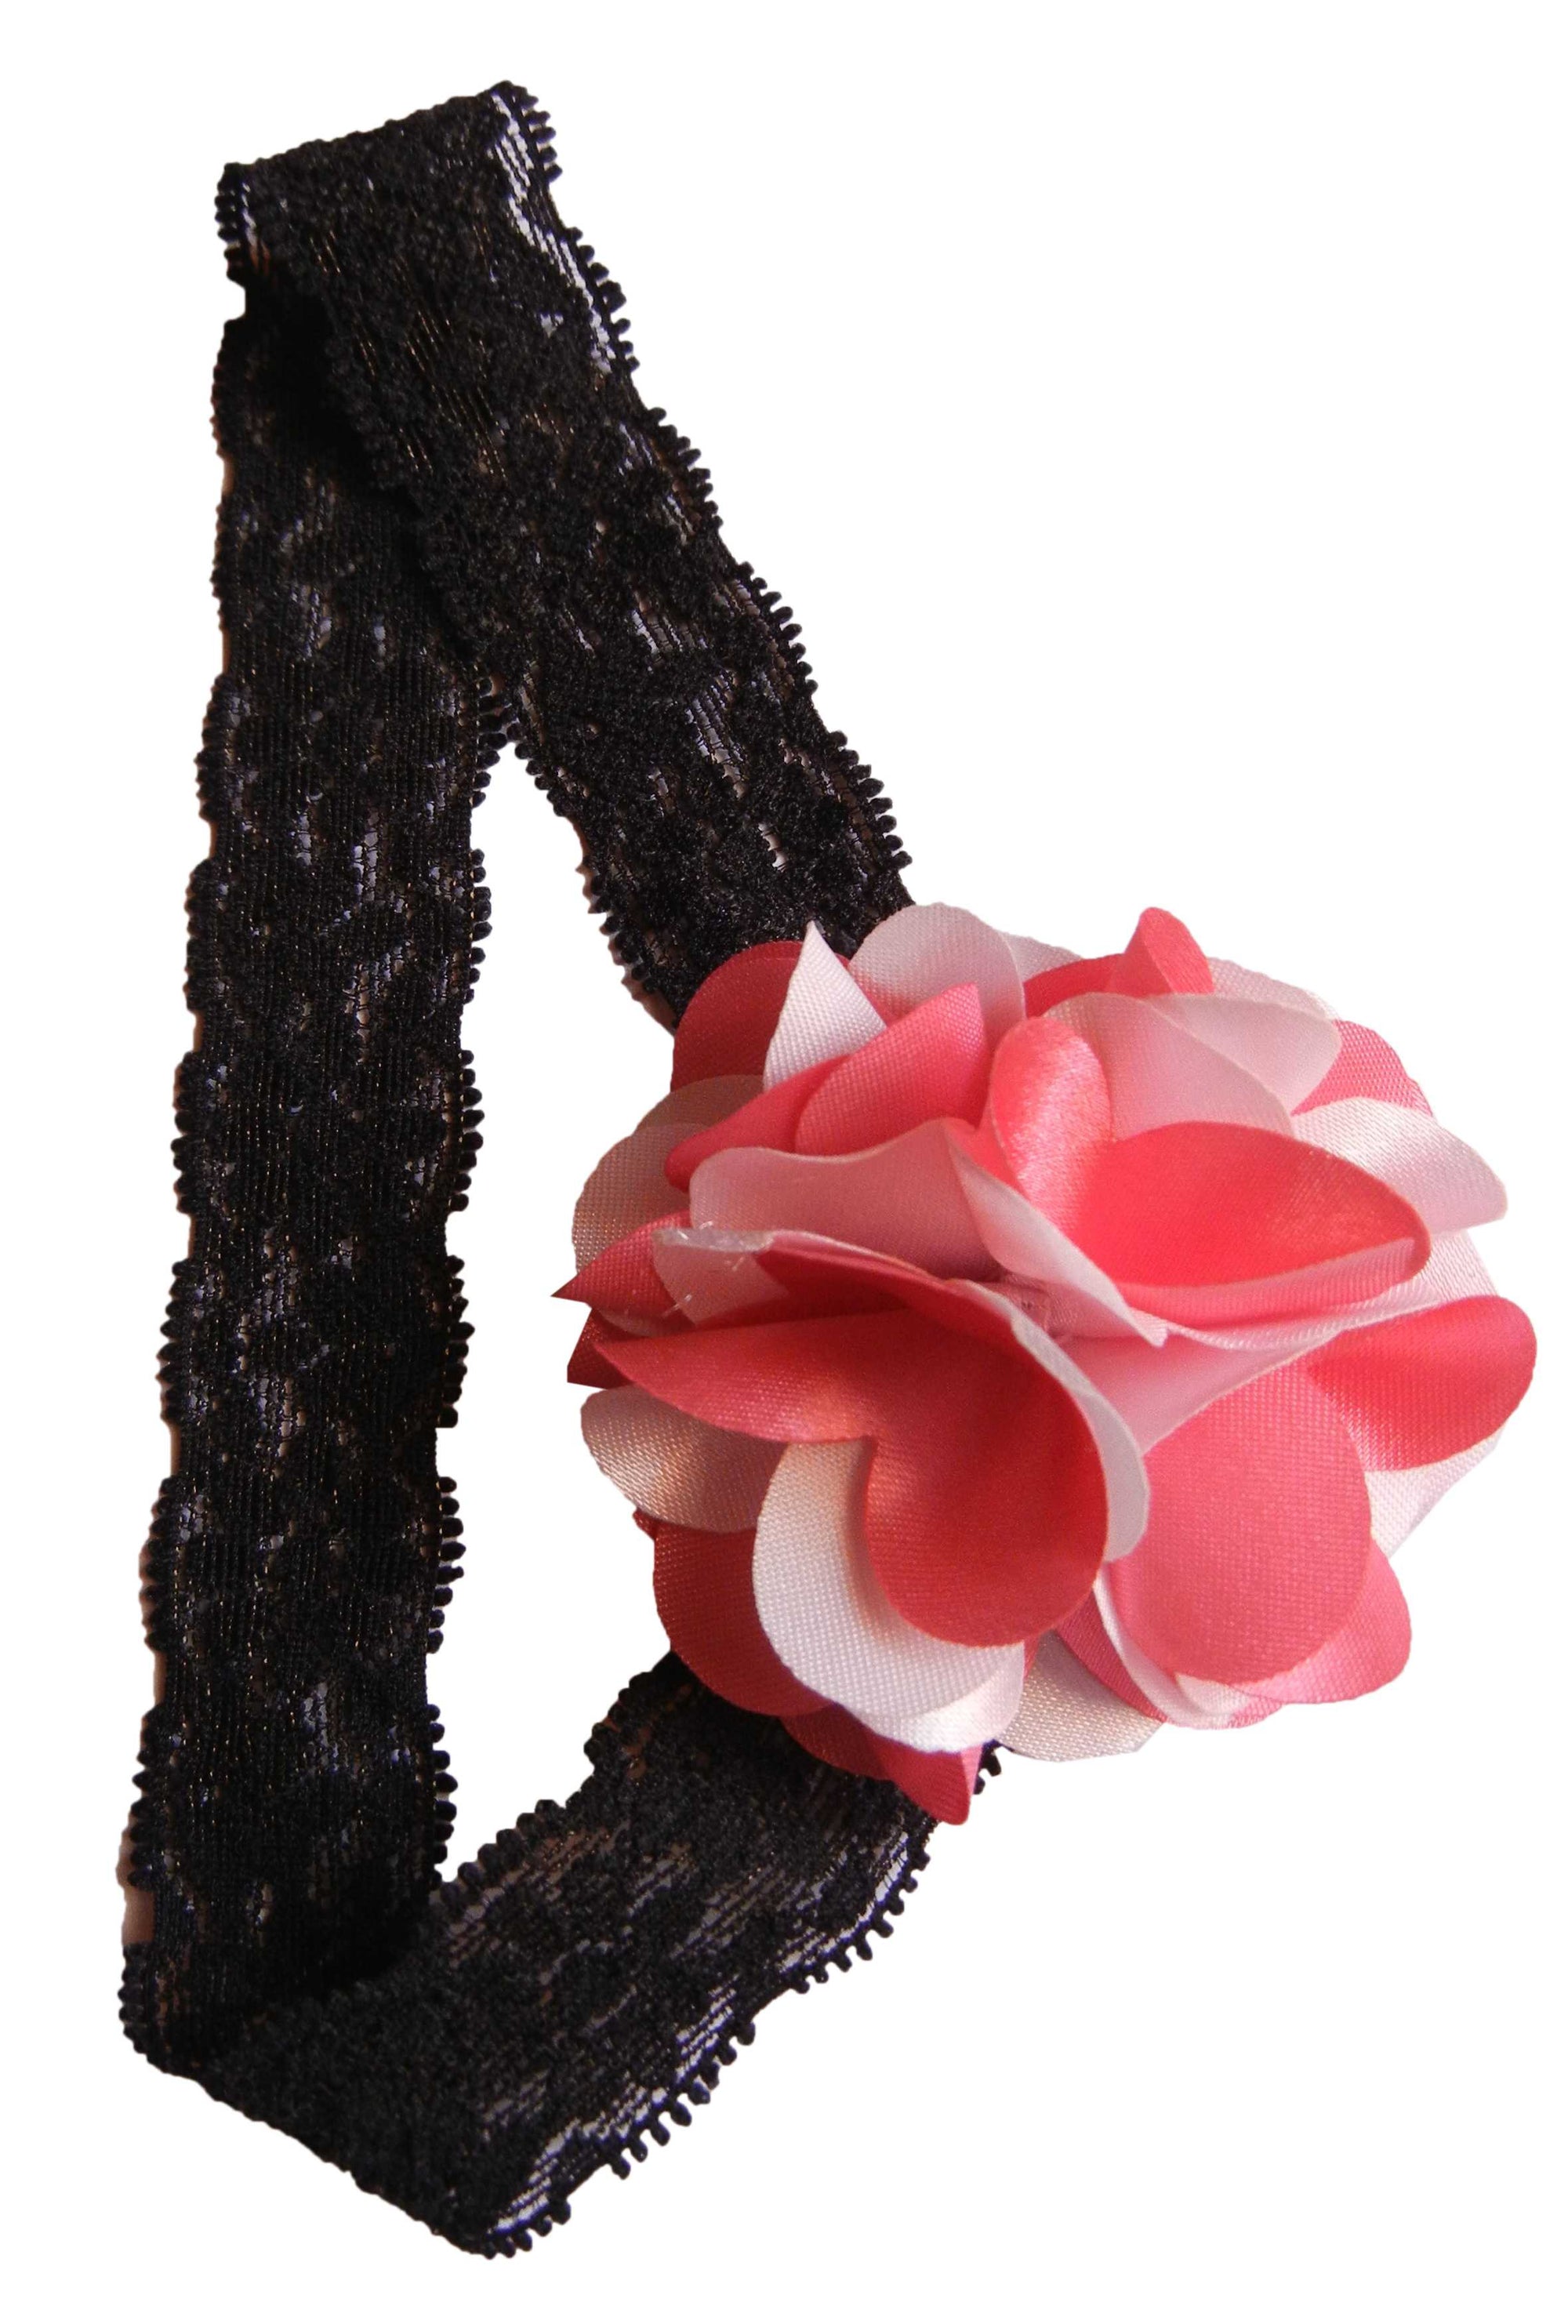 Onpink&pink flower on Blk Lace Hair Band for Kids